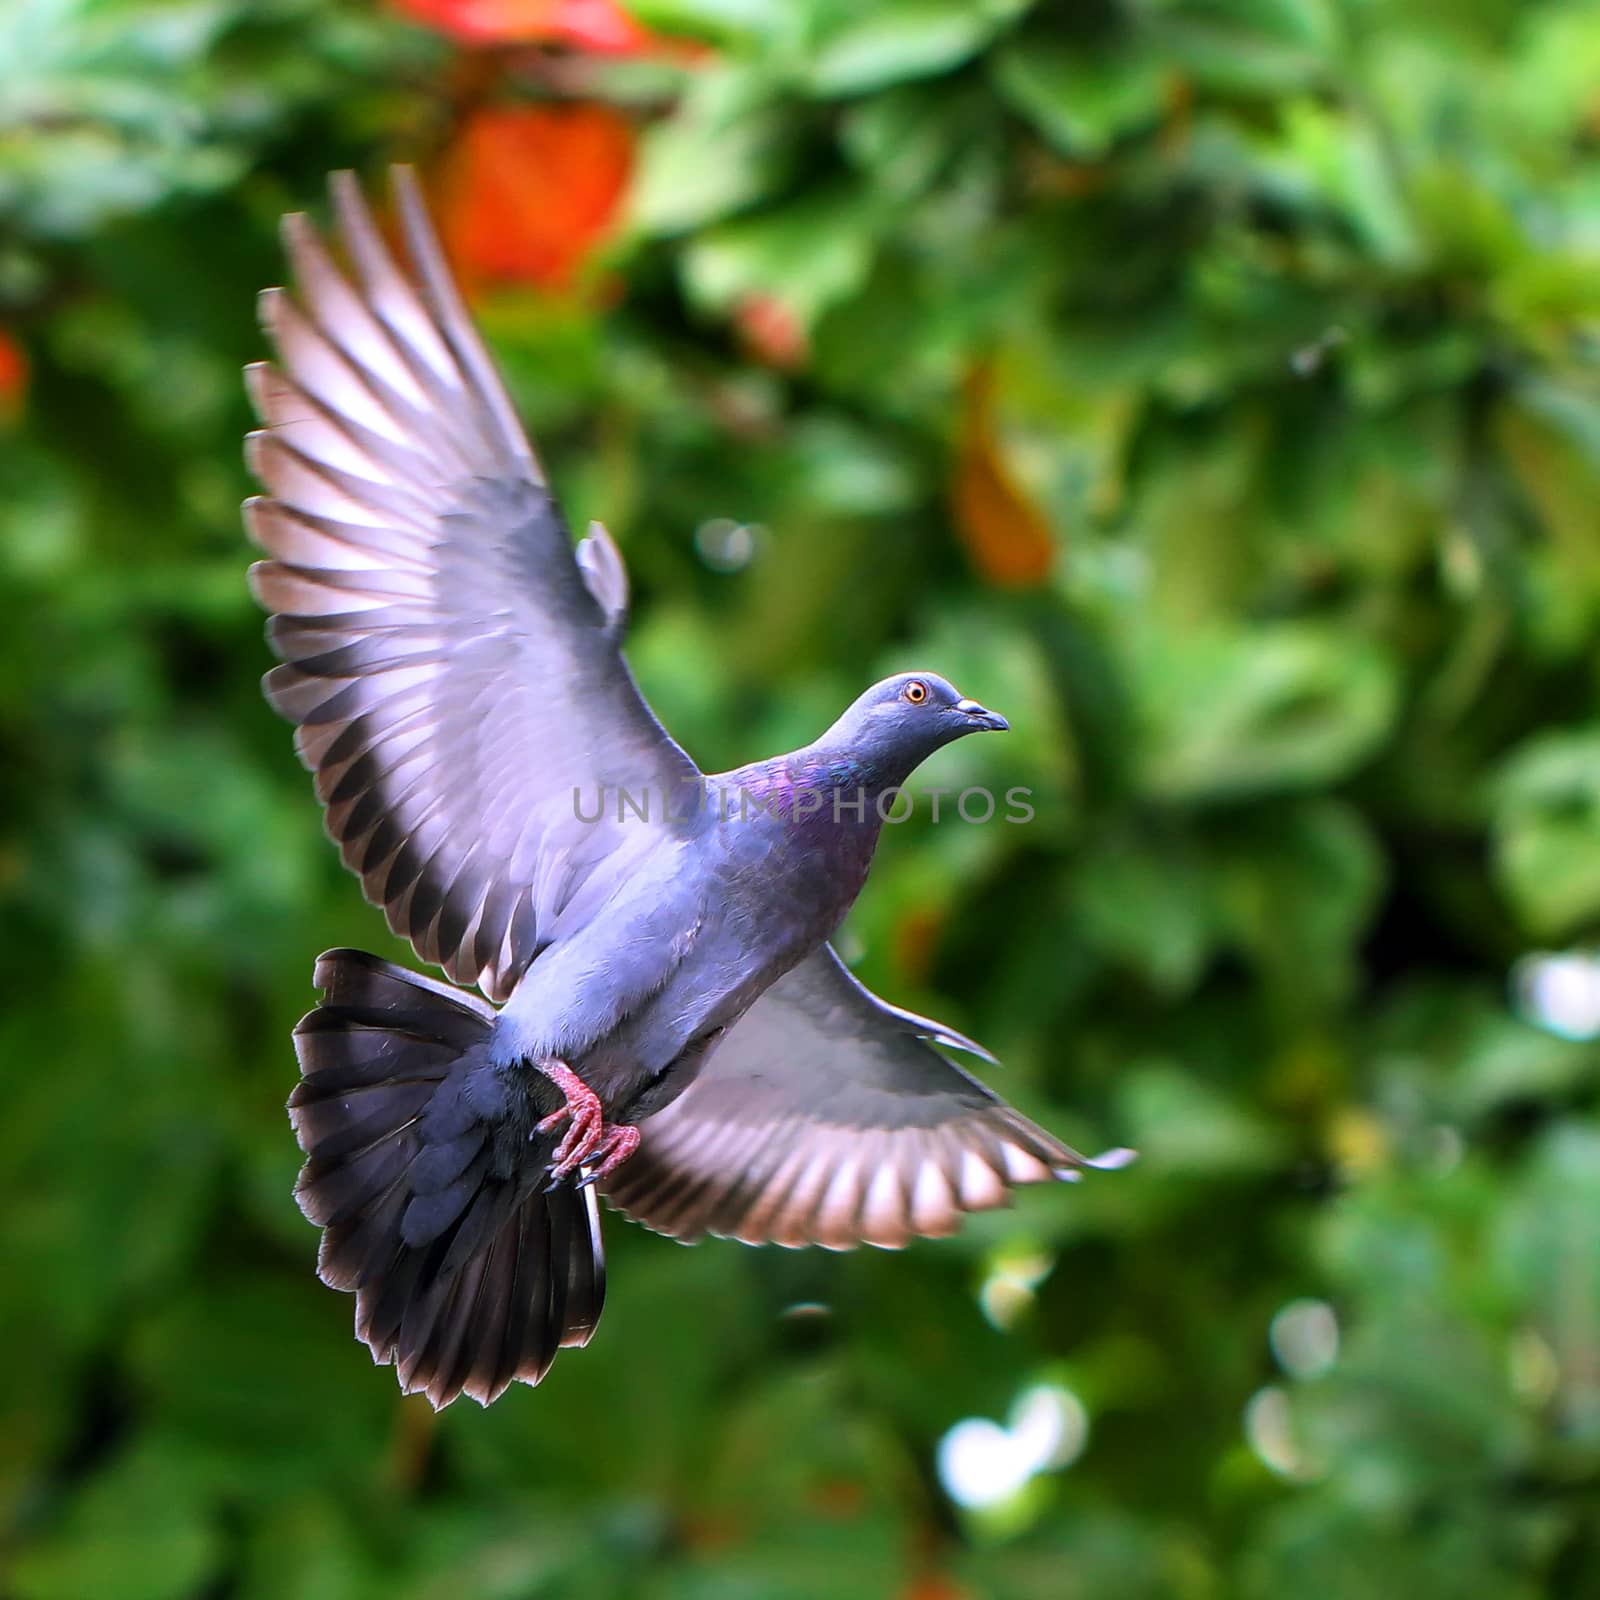 Flying pigeon in the natural